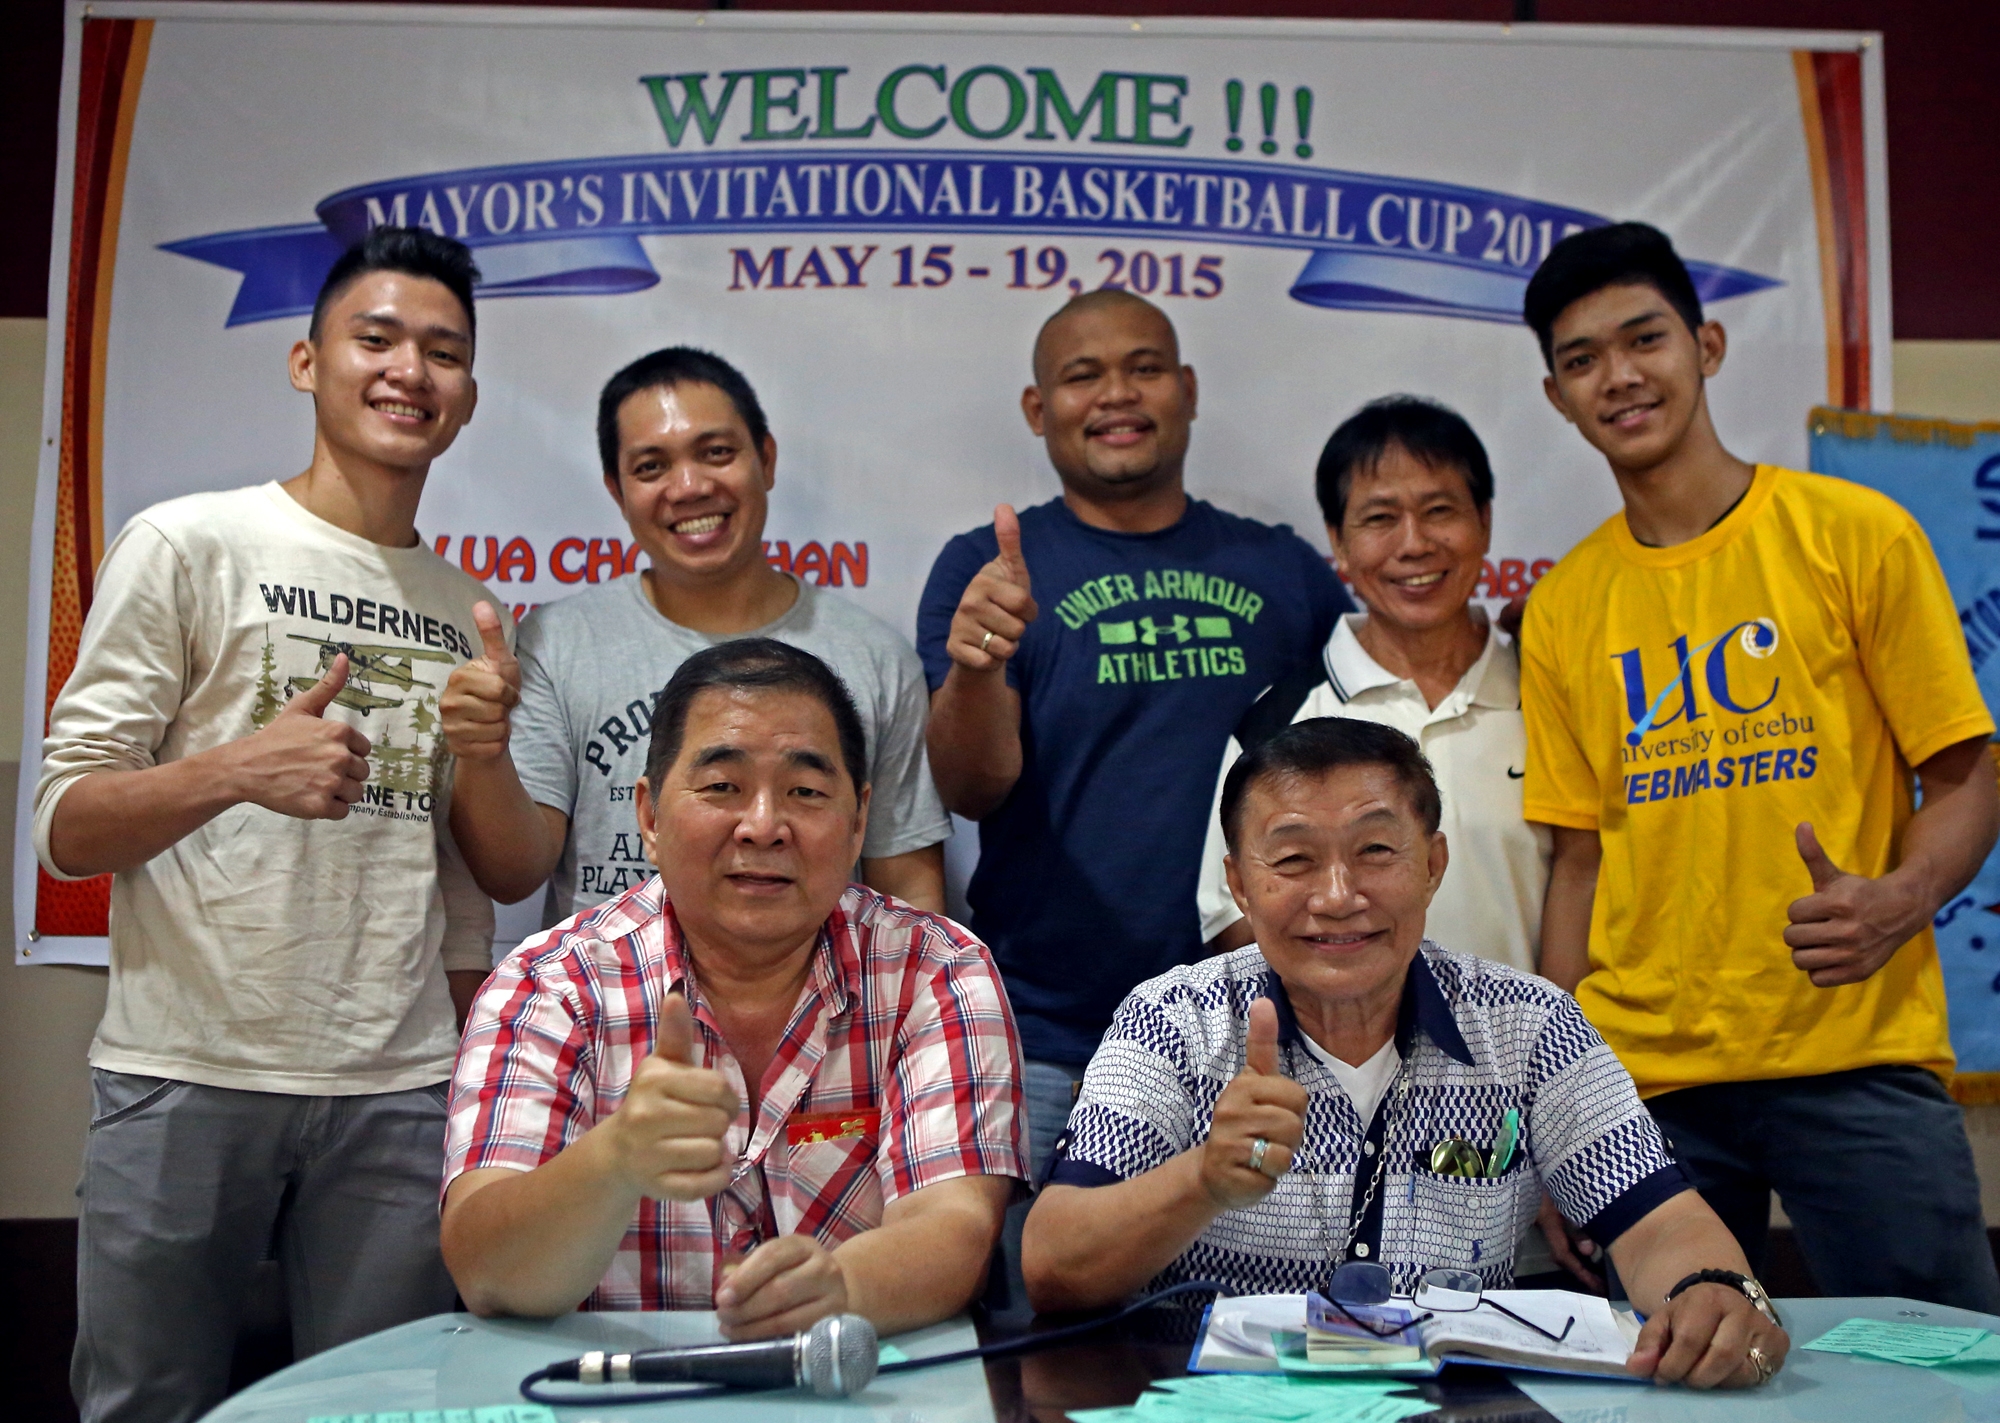 Chao Sy and Bobby Inoferio (seated front row) at the (left to right) Clint Suelto UC point guard,Britt Carlo Reroma USC Coach,Joever Samonte UC Coach,Danny Catingub UC Asst. Coach and John Calvin Jabello show thumbs up for their Mayors Invitational Basketball Cup 2015 these coming May 15-19 at La Fortuna hotel.